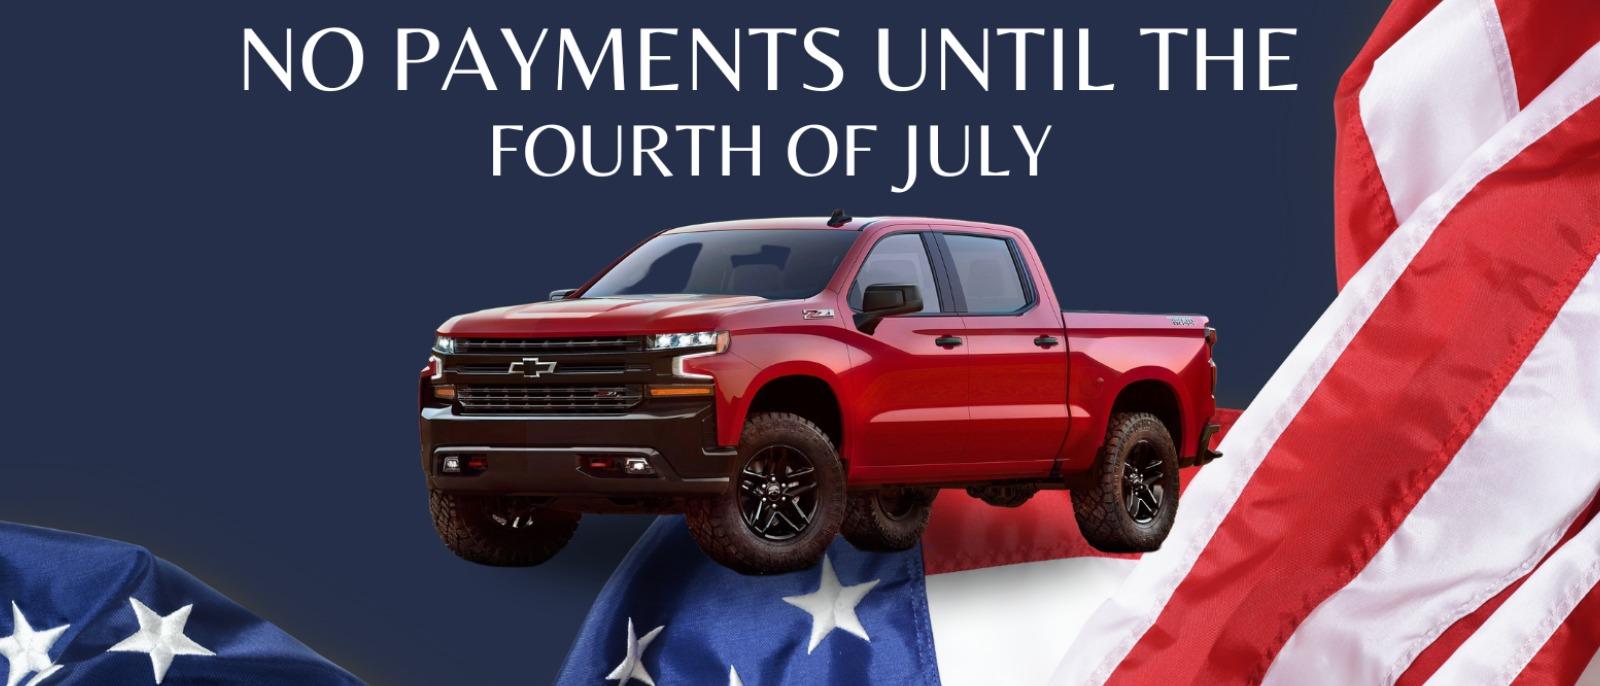 No payments until the 4th of july